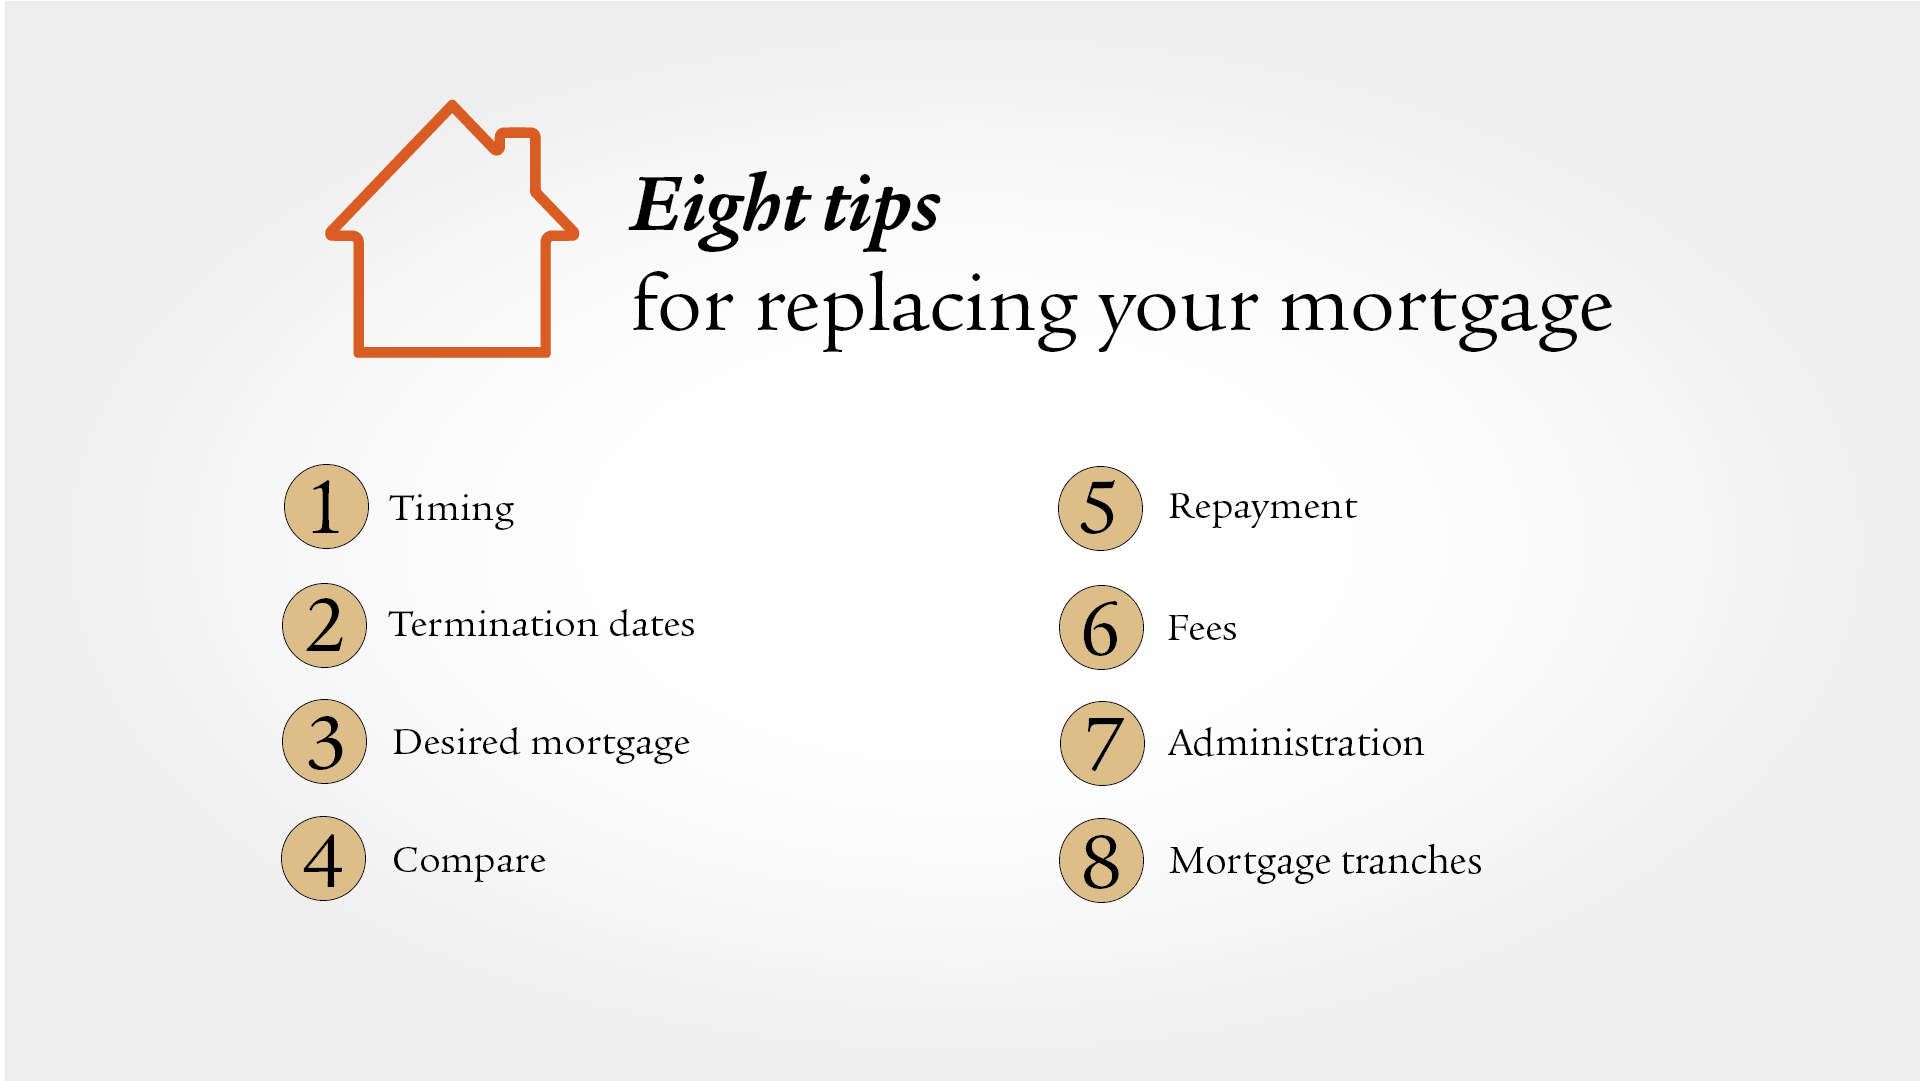 A graphic shows eight tips which you should consider when replacing your mortgage